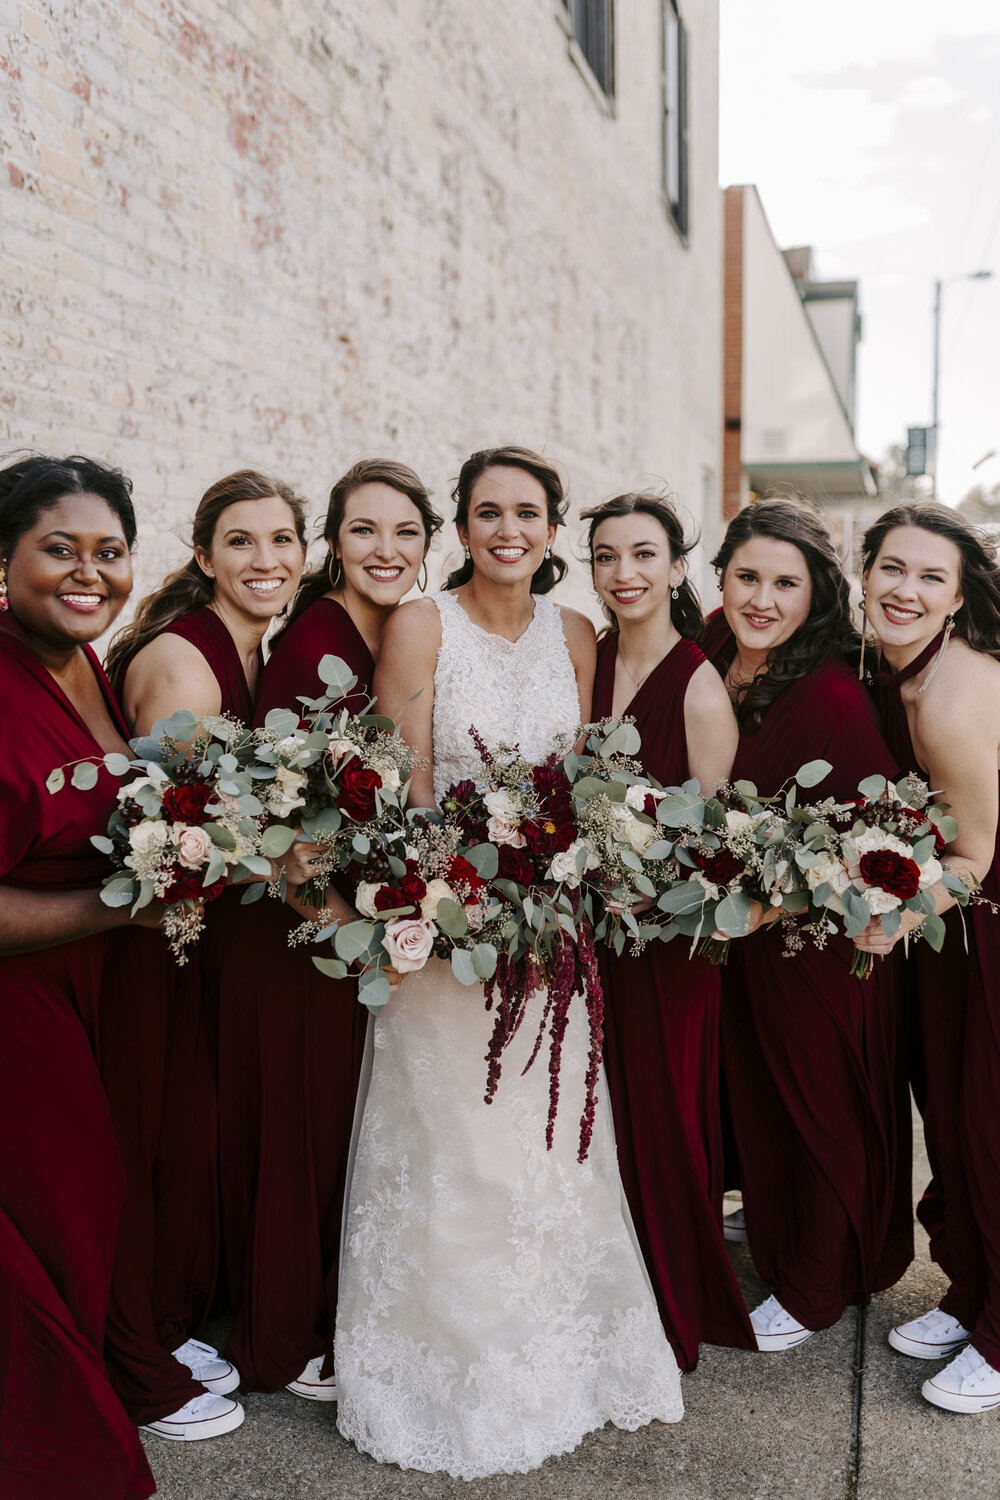 Bride and bridesmaids portraits in the fall